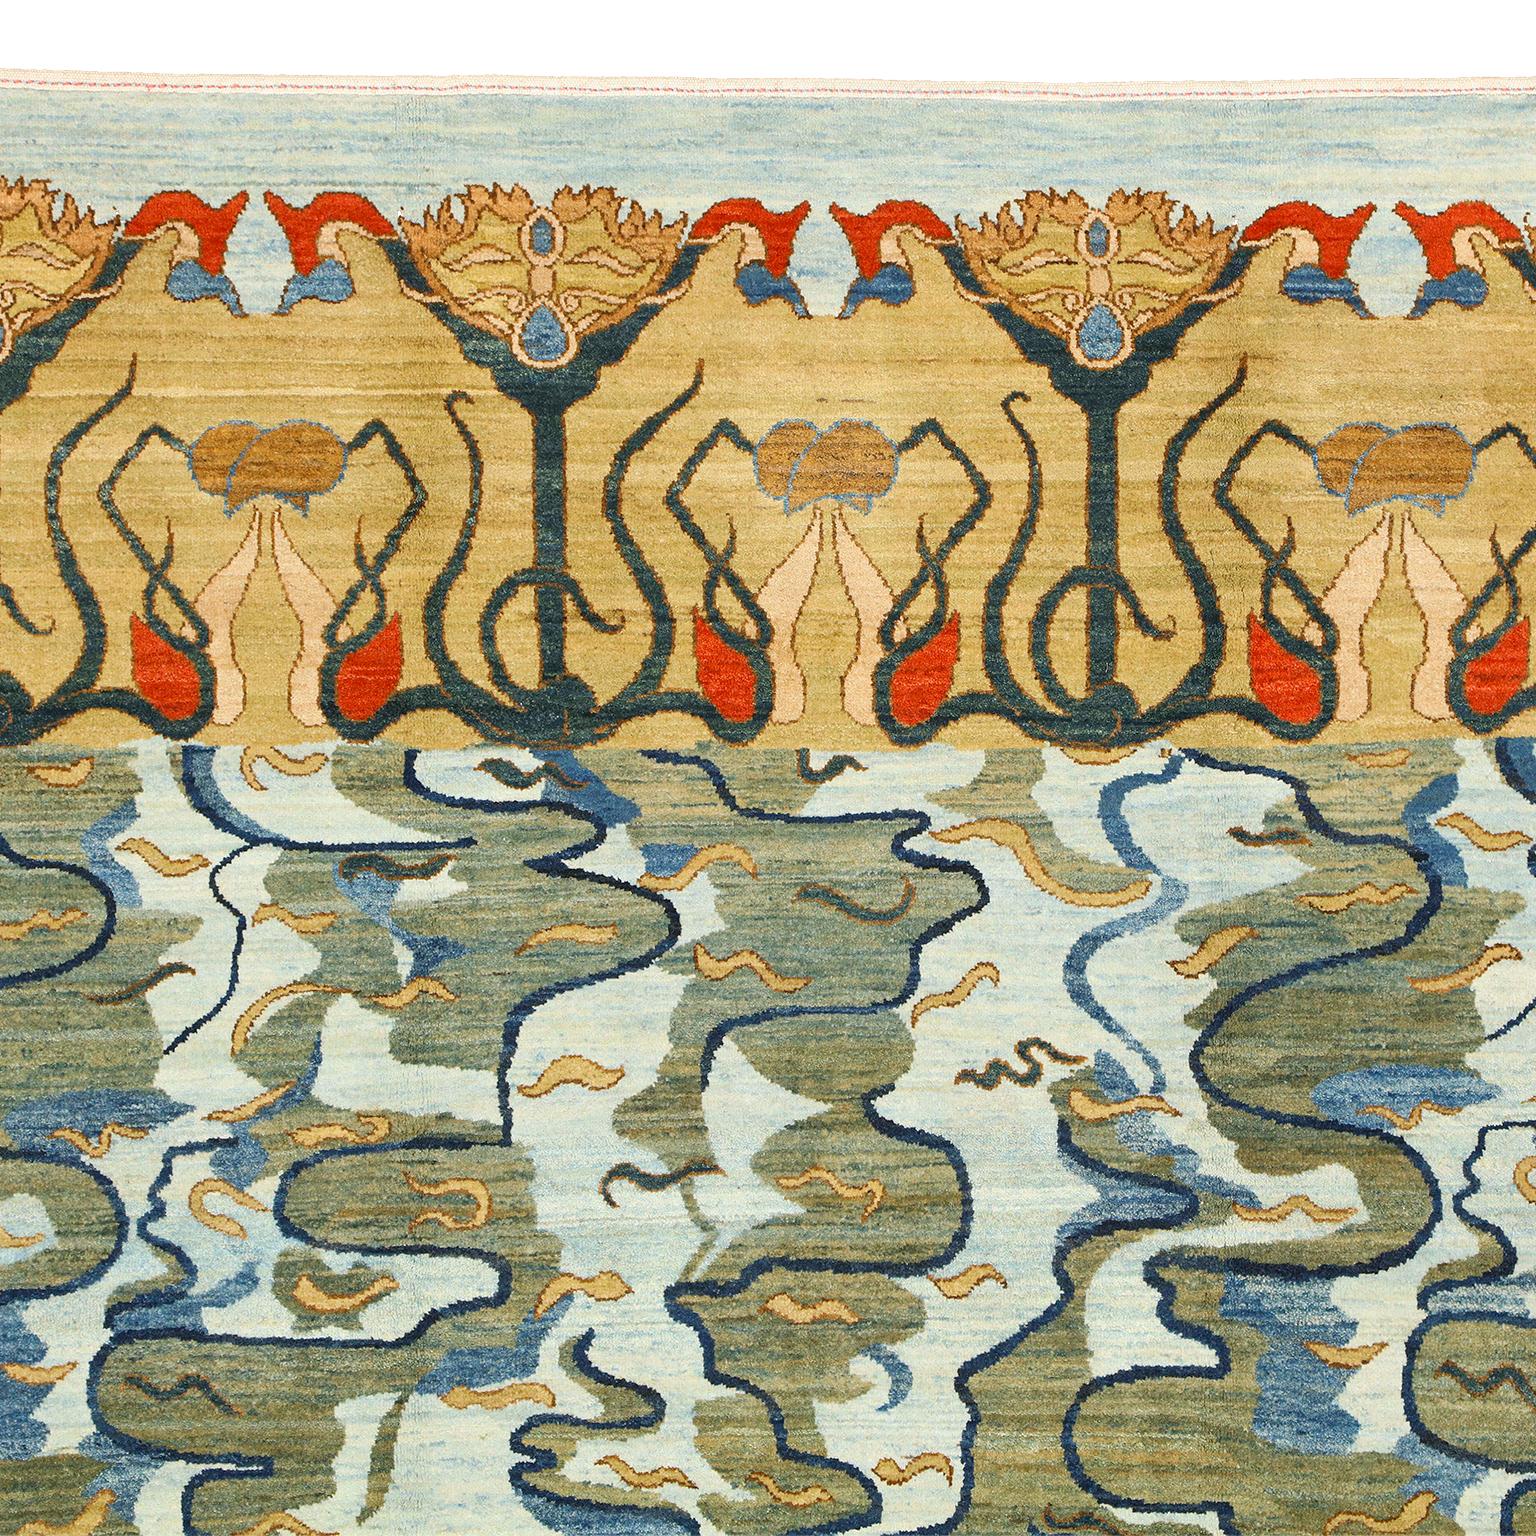 From Orley Shabahang’s Art Nouveau collection, this contemporary 6' x 9' Persian carpet, measuring exactly 5’11” x 9’2”, possesses vivid blues, greens, golds, and oranges, all achieved using organic dyes. Traditionally, rug weaving has always taken